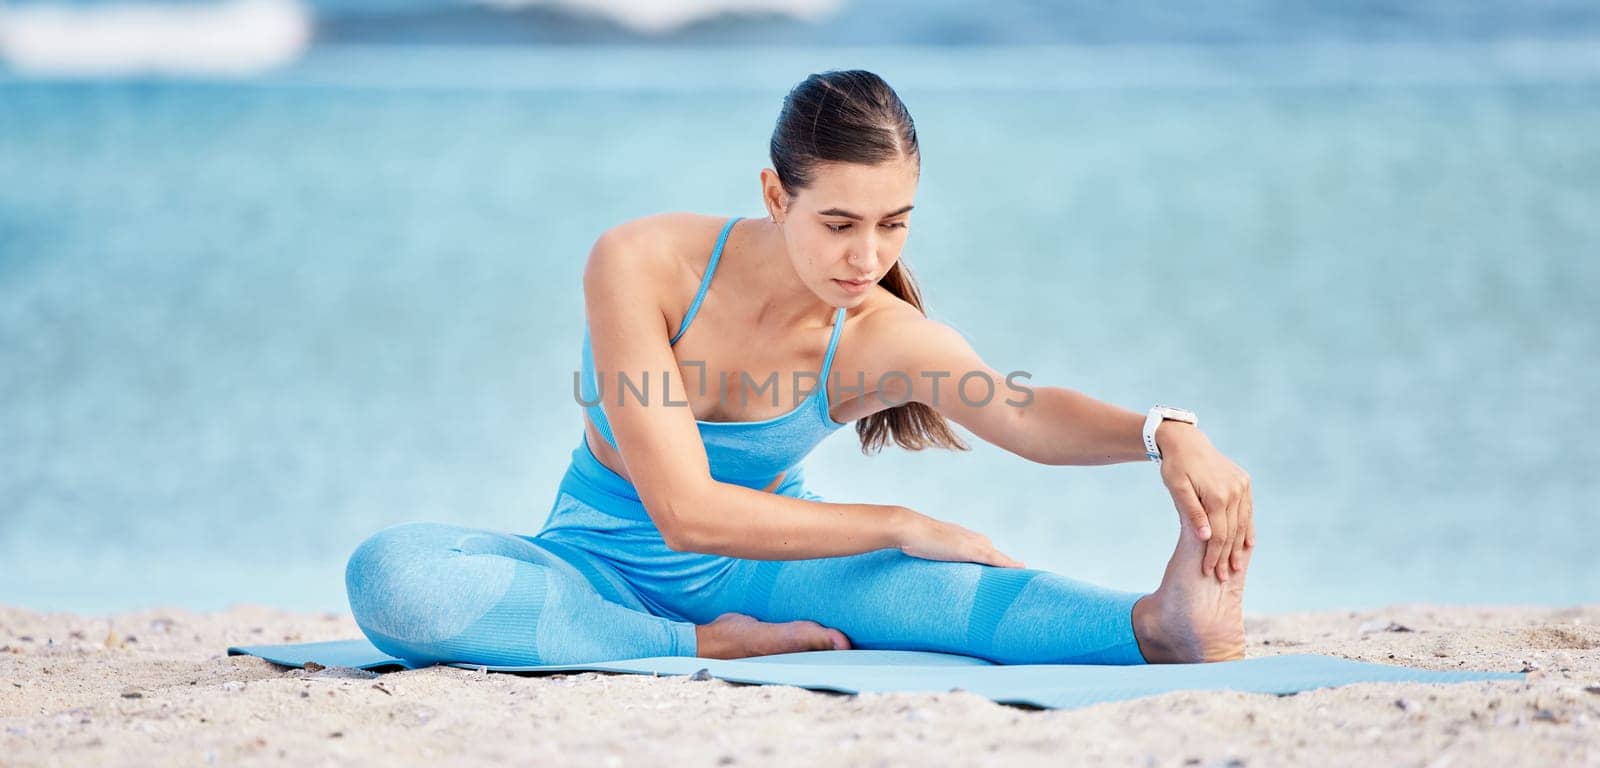 Stretching legs, yoga and woman by beach on sports mat for wellness, healthy body and balance. Performance, nature and female person outdoors for exercise, training and workout by sea for pilates by YuriArcurs